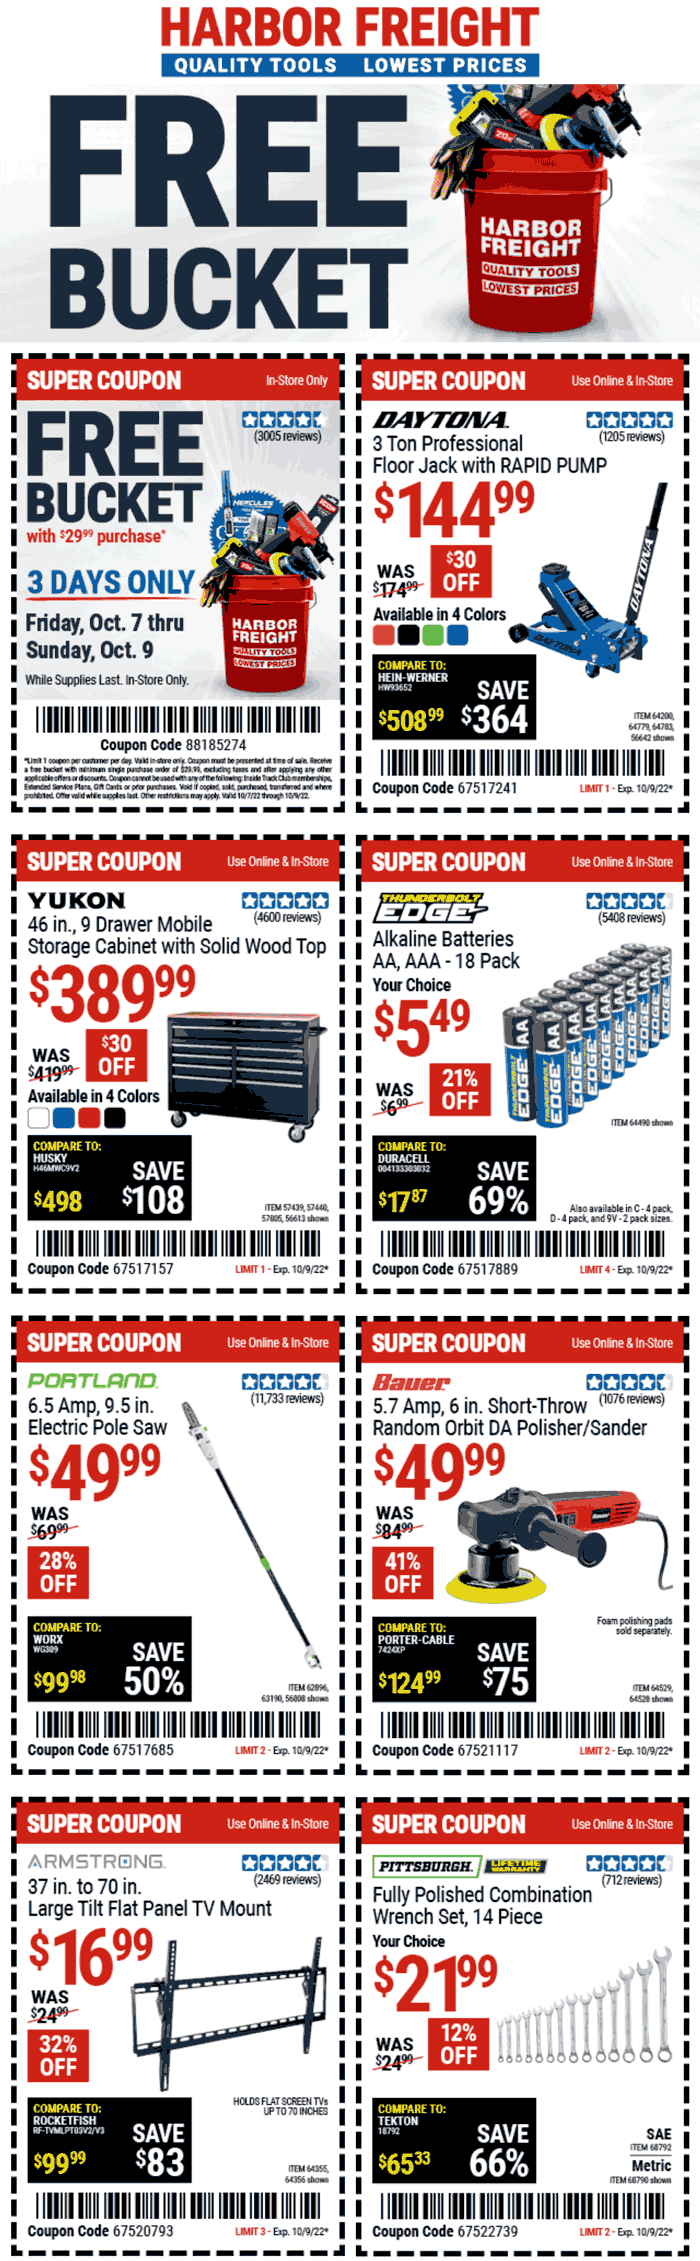 Harbor Freight coupons & promo code for [November 2022]